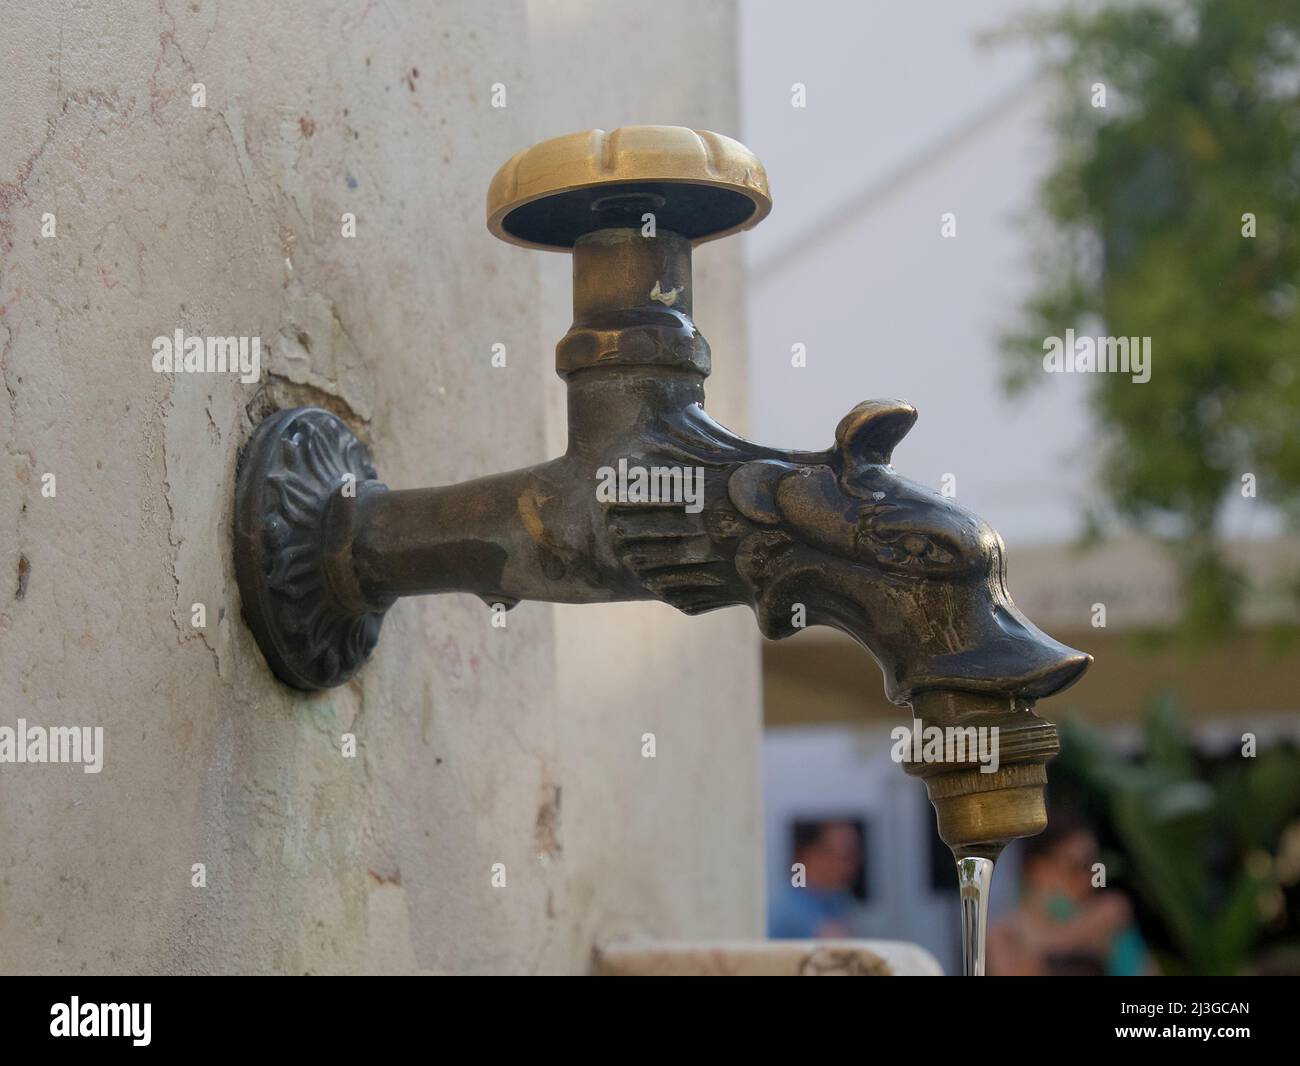 Vintage water tap - public drinking well in Monopoli, Puglia, Italy Stock Photo